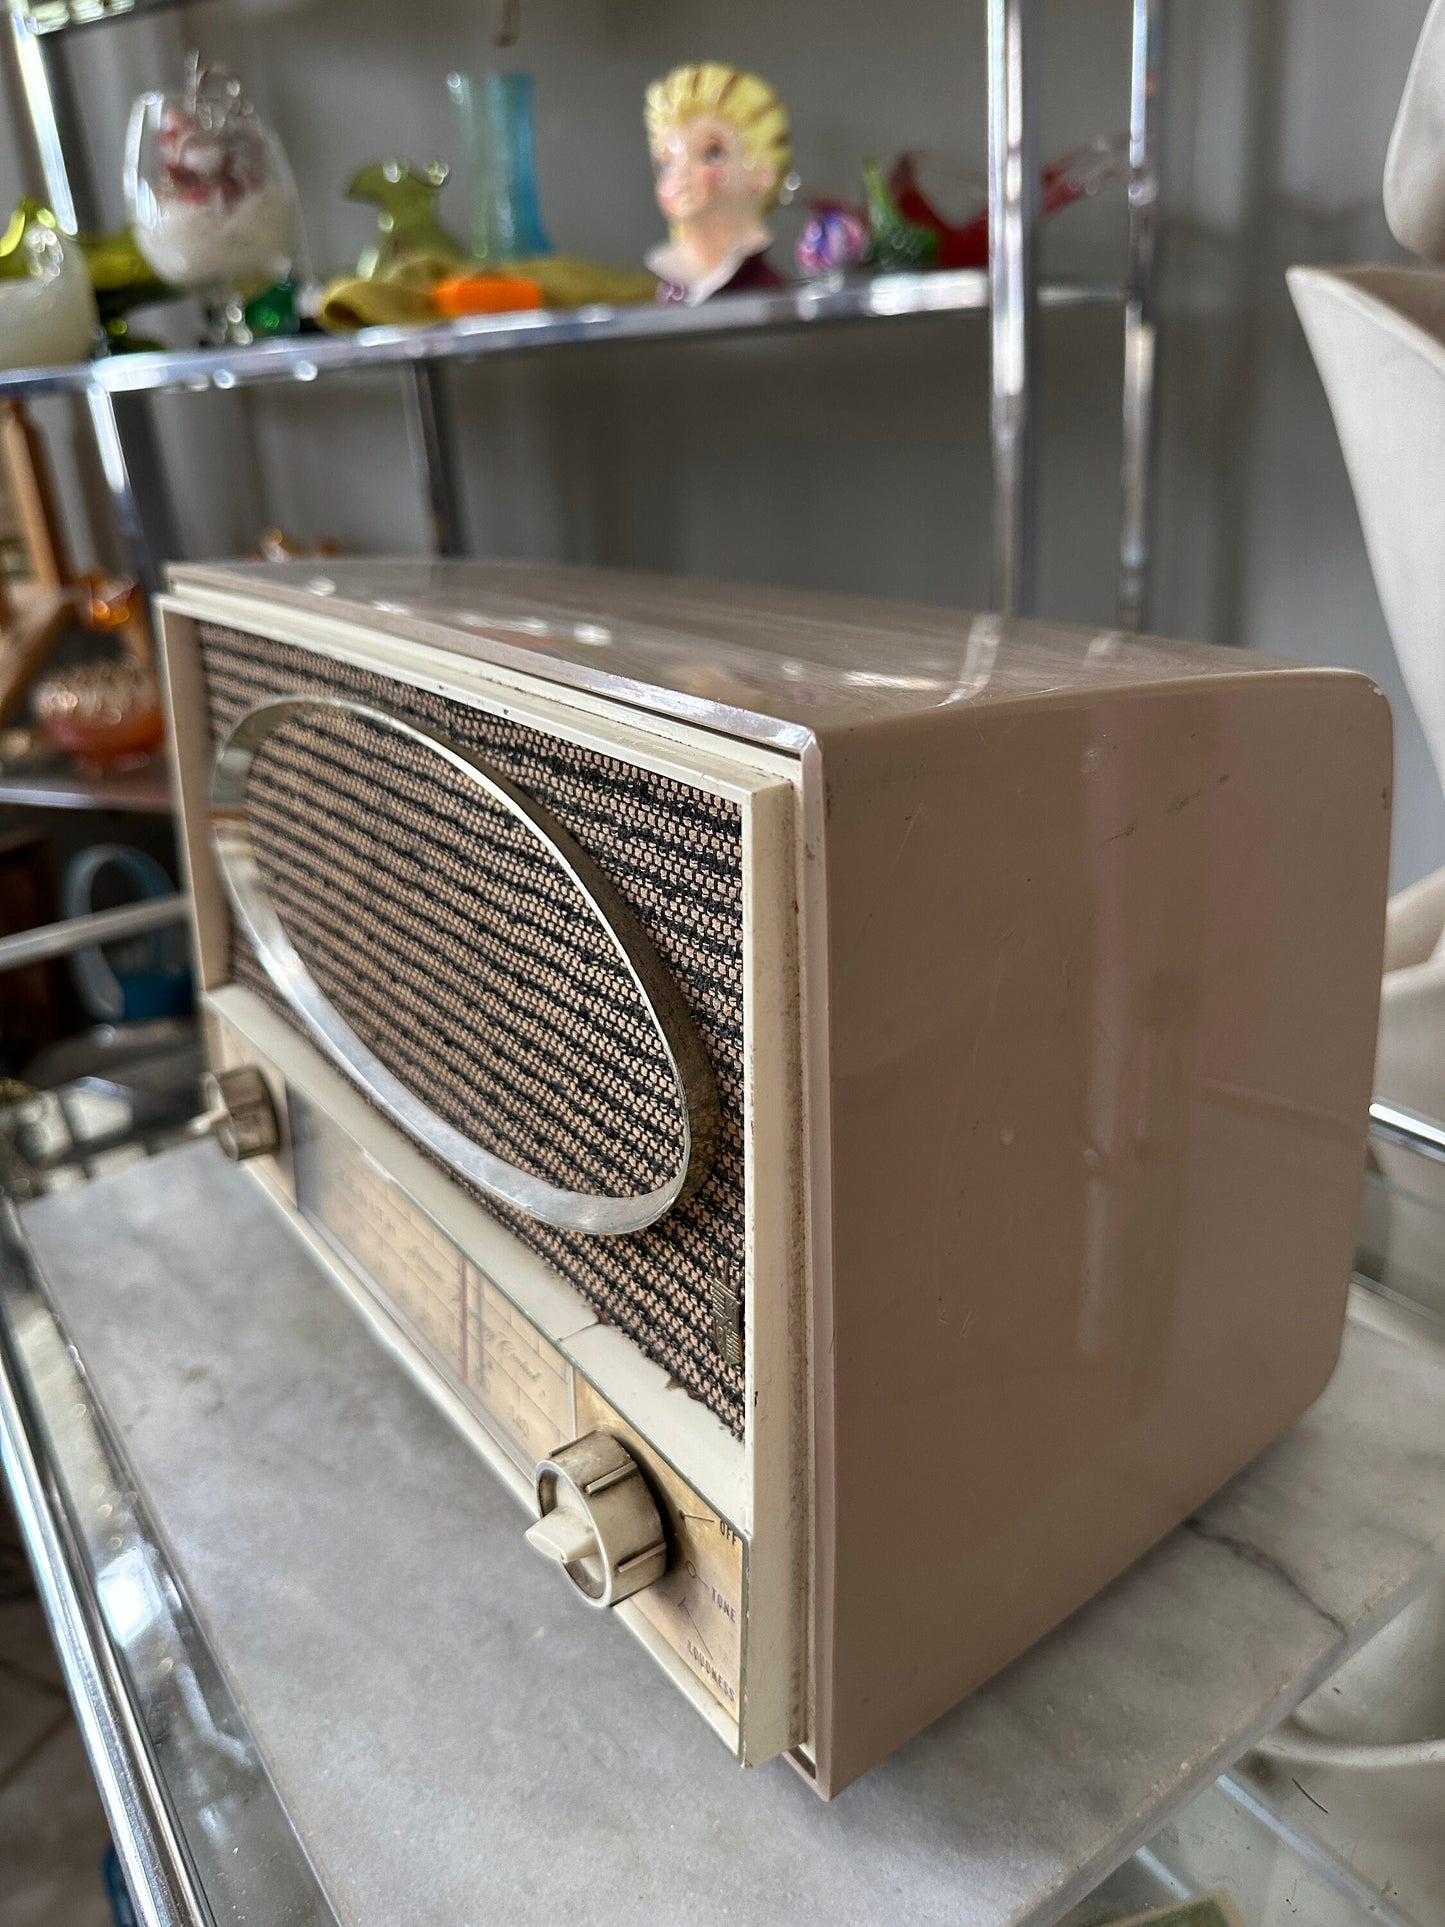 Vintage Radio Zenith Automatic Frequency Control Tube Radio 1959 Beige / Tan Vintage Zenith Radio